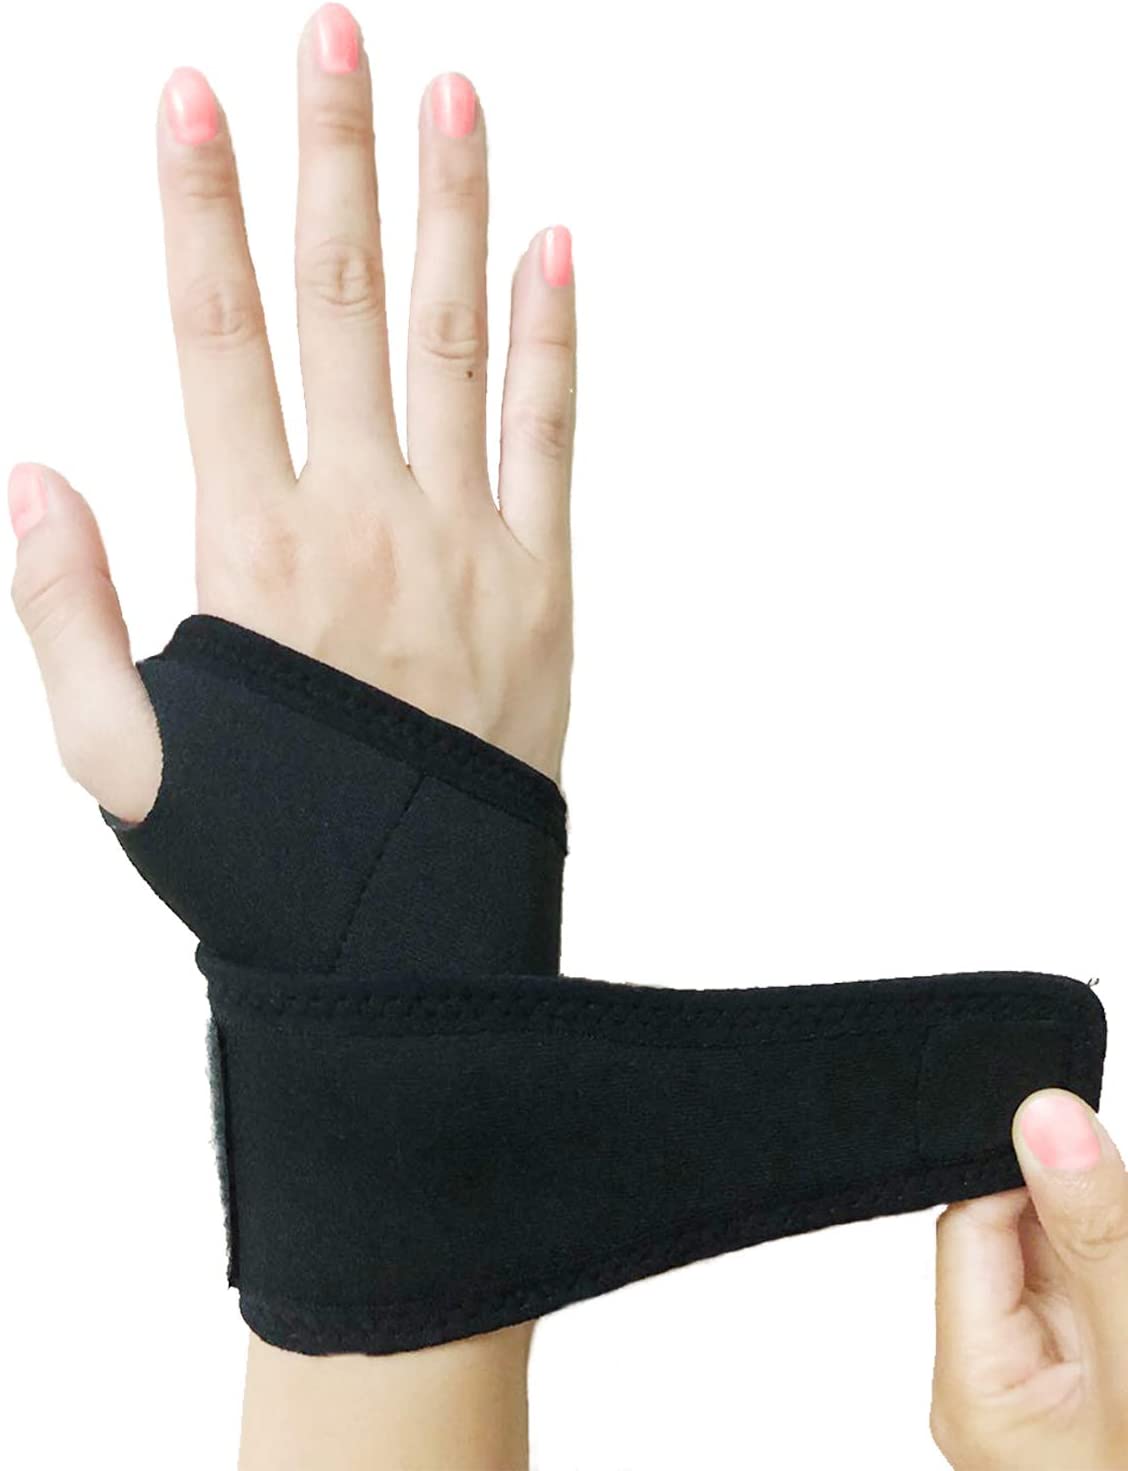 BROKWEEN Wrist Support Brace Pain Relief Right Hand - e4cents